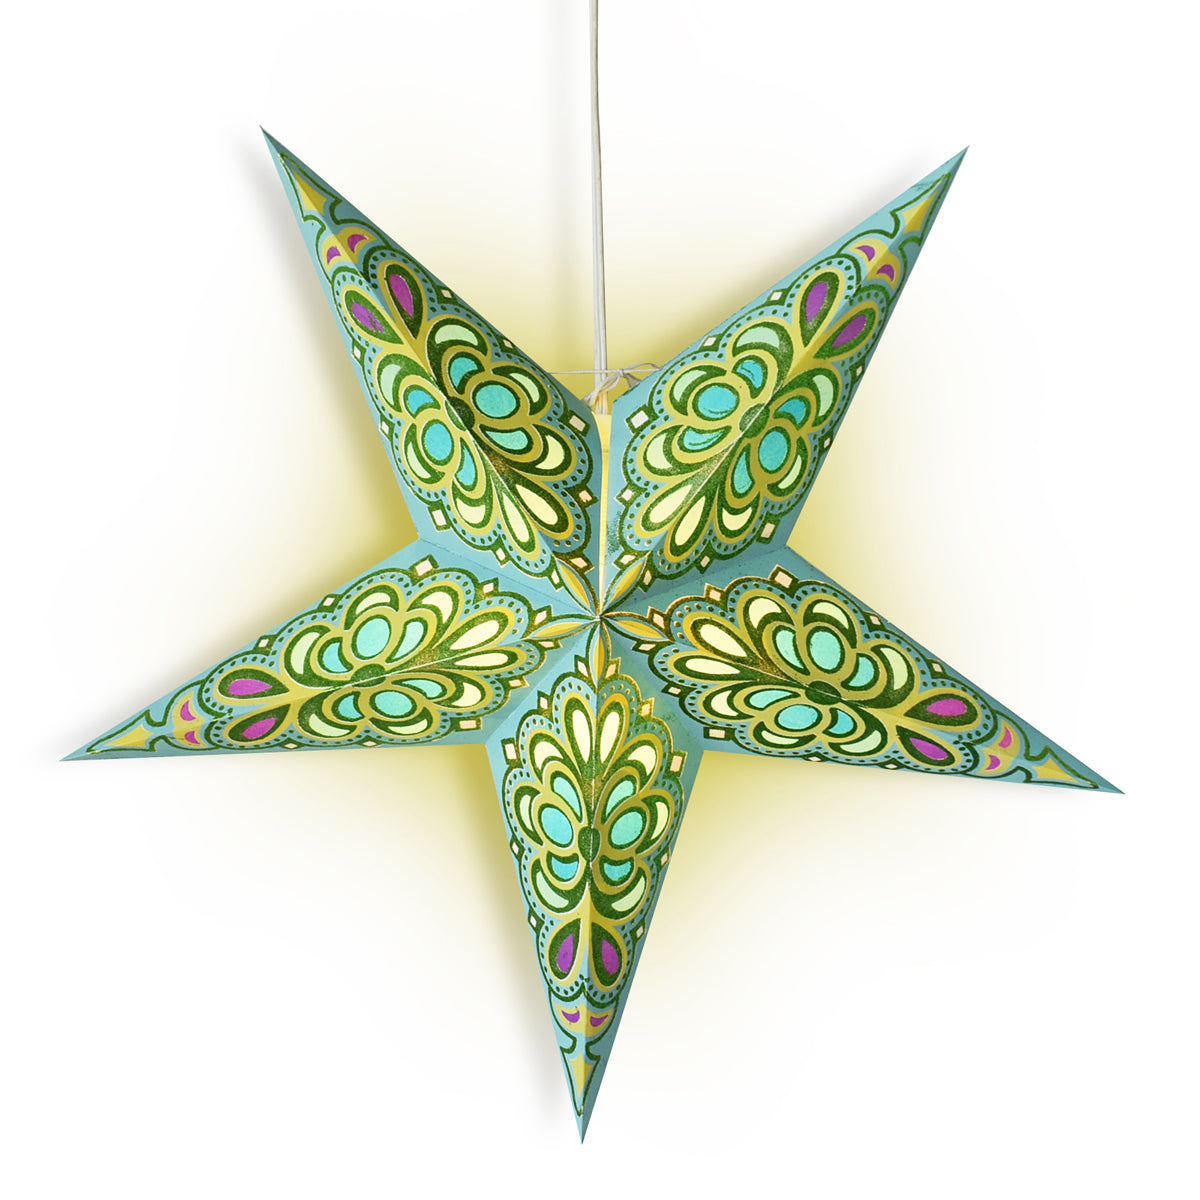 3-PACK + Cord | Green / Turquoise Merry Glitter 24&quot; Illuminated Paper Star Lanterns and Lamp Cord Hanging Decorations - PaperLanternStore.com - Paper Lanterns, Decor, Party Lights &amp; More